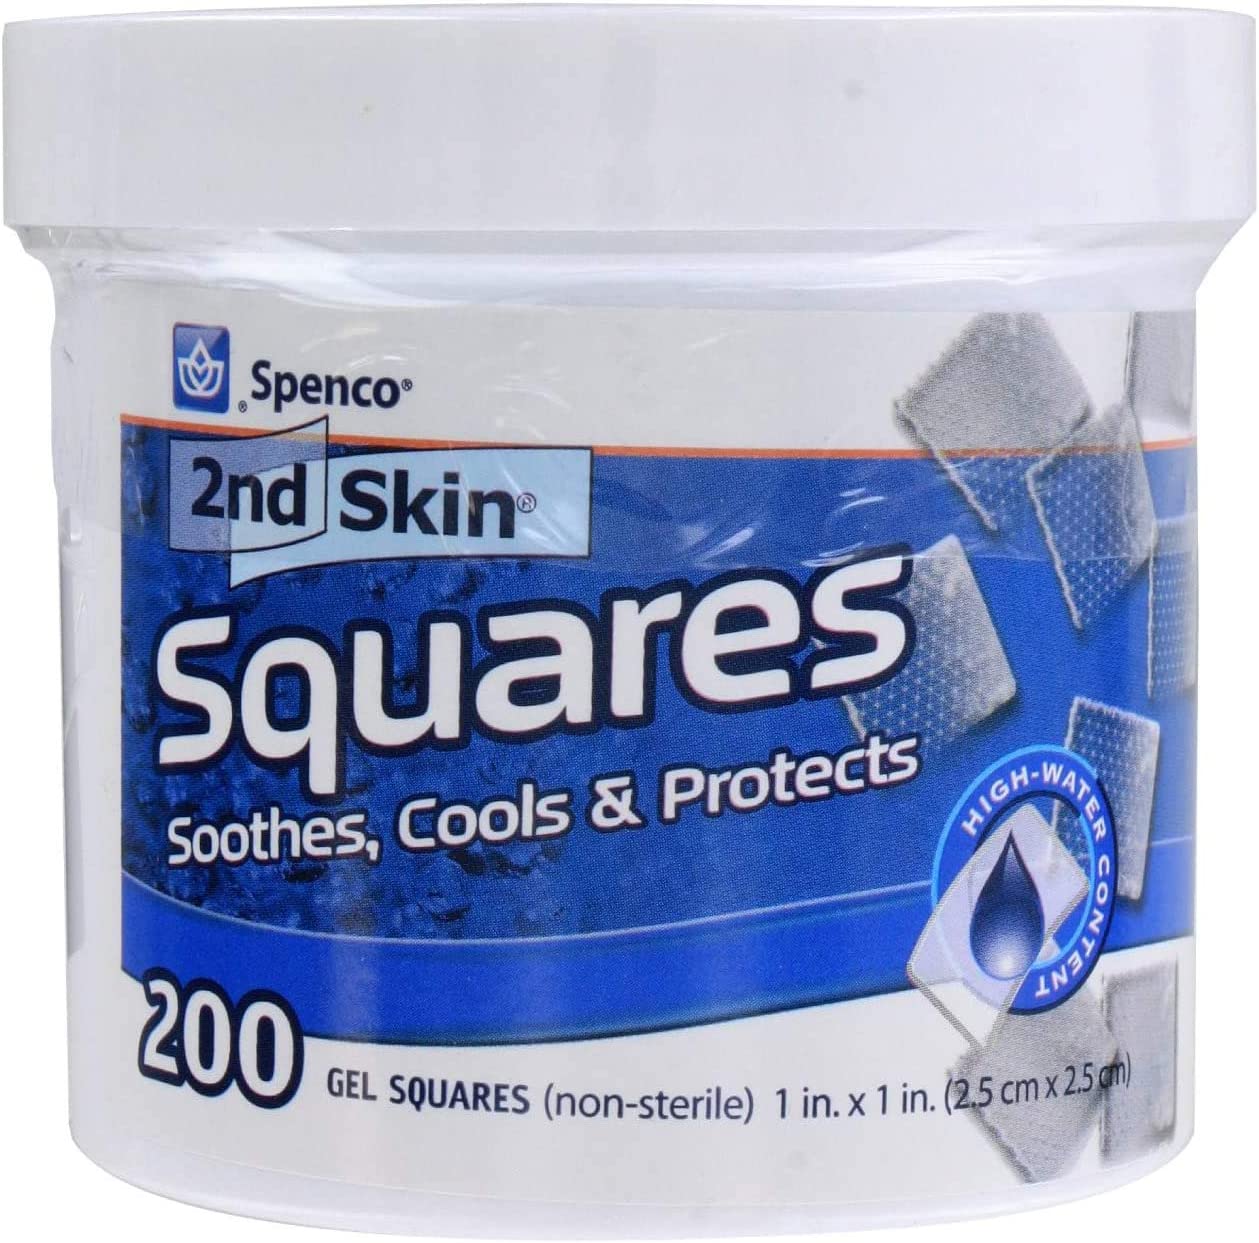 Spenco 2nd Skin Squares Soothing Protection, Gel Squares 200-Count, Bacterial Barrier, One Size